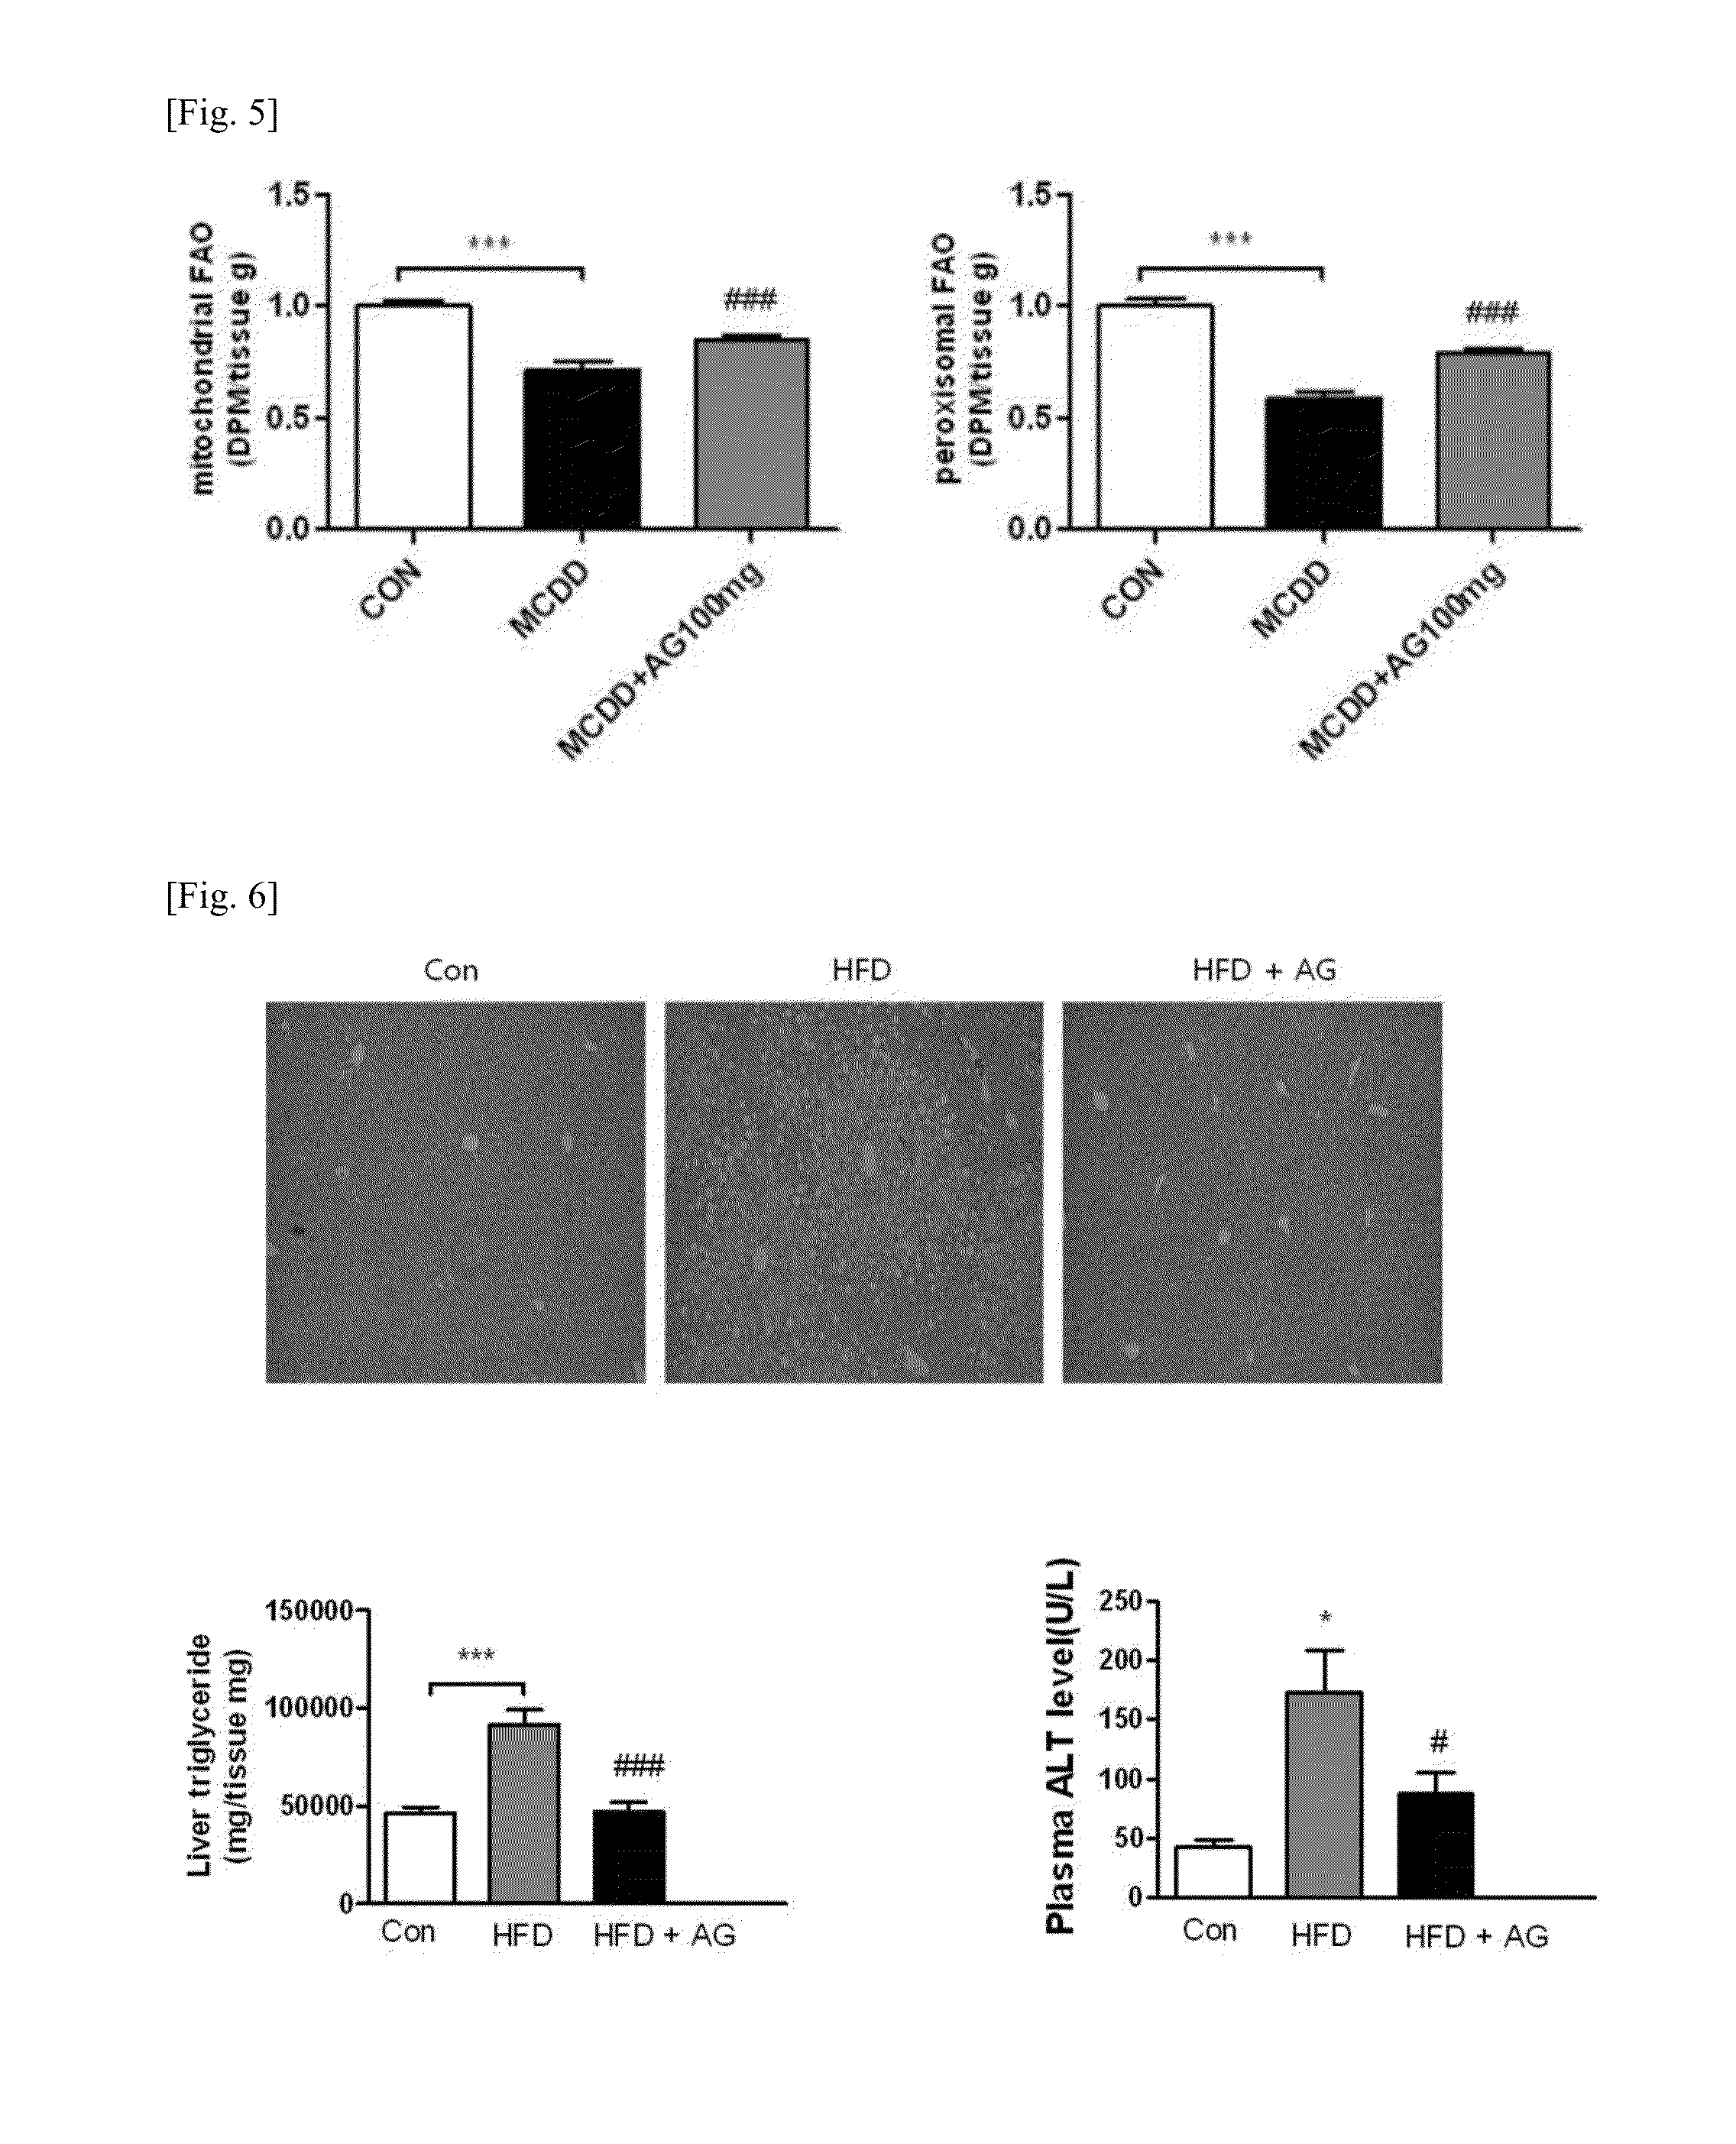 Pharmaceutical composition for preventing or treating liver diseases, containing plasmalogen precursor, plasmalogen or plasmalogen analog as effective component